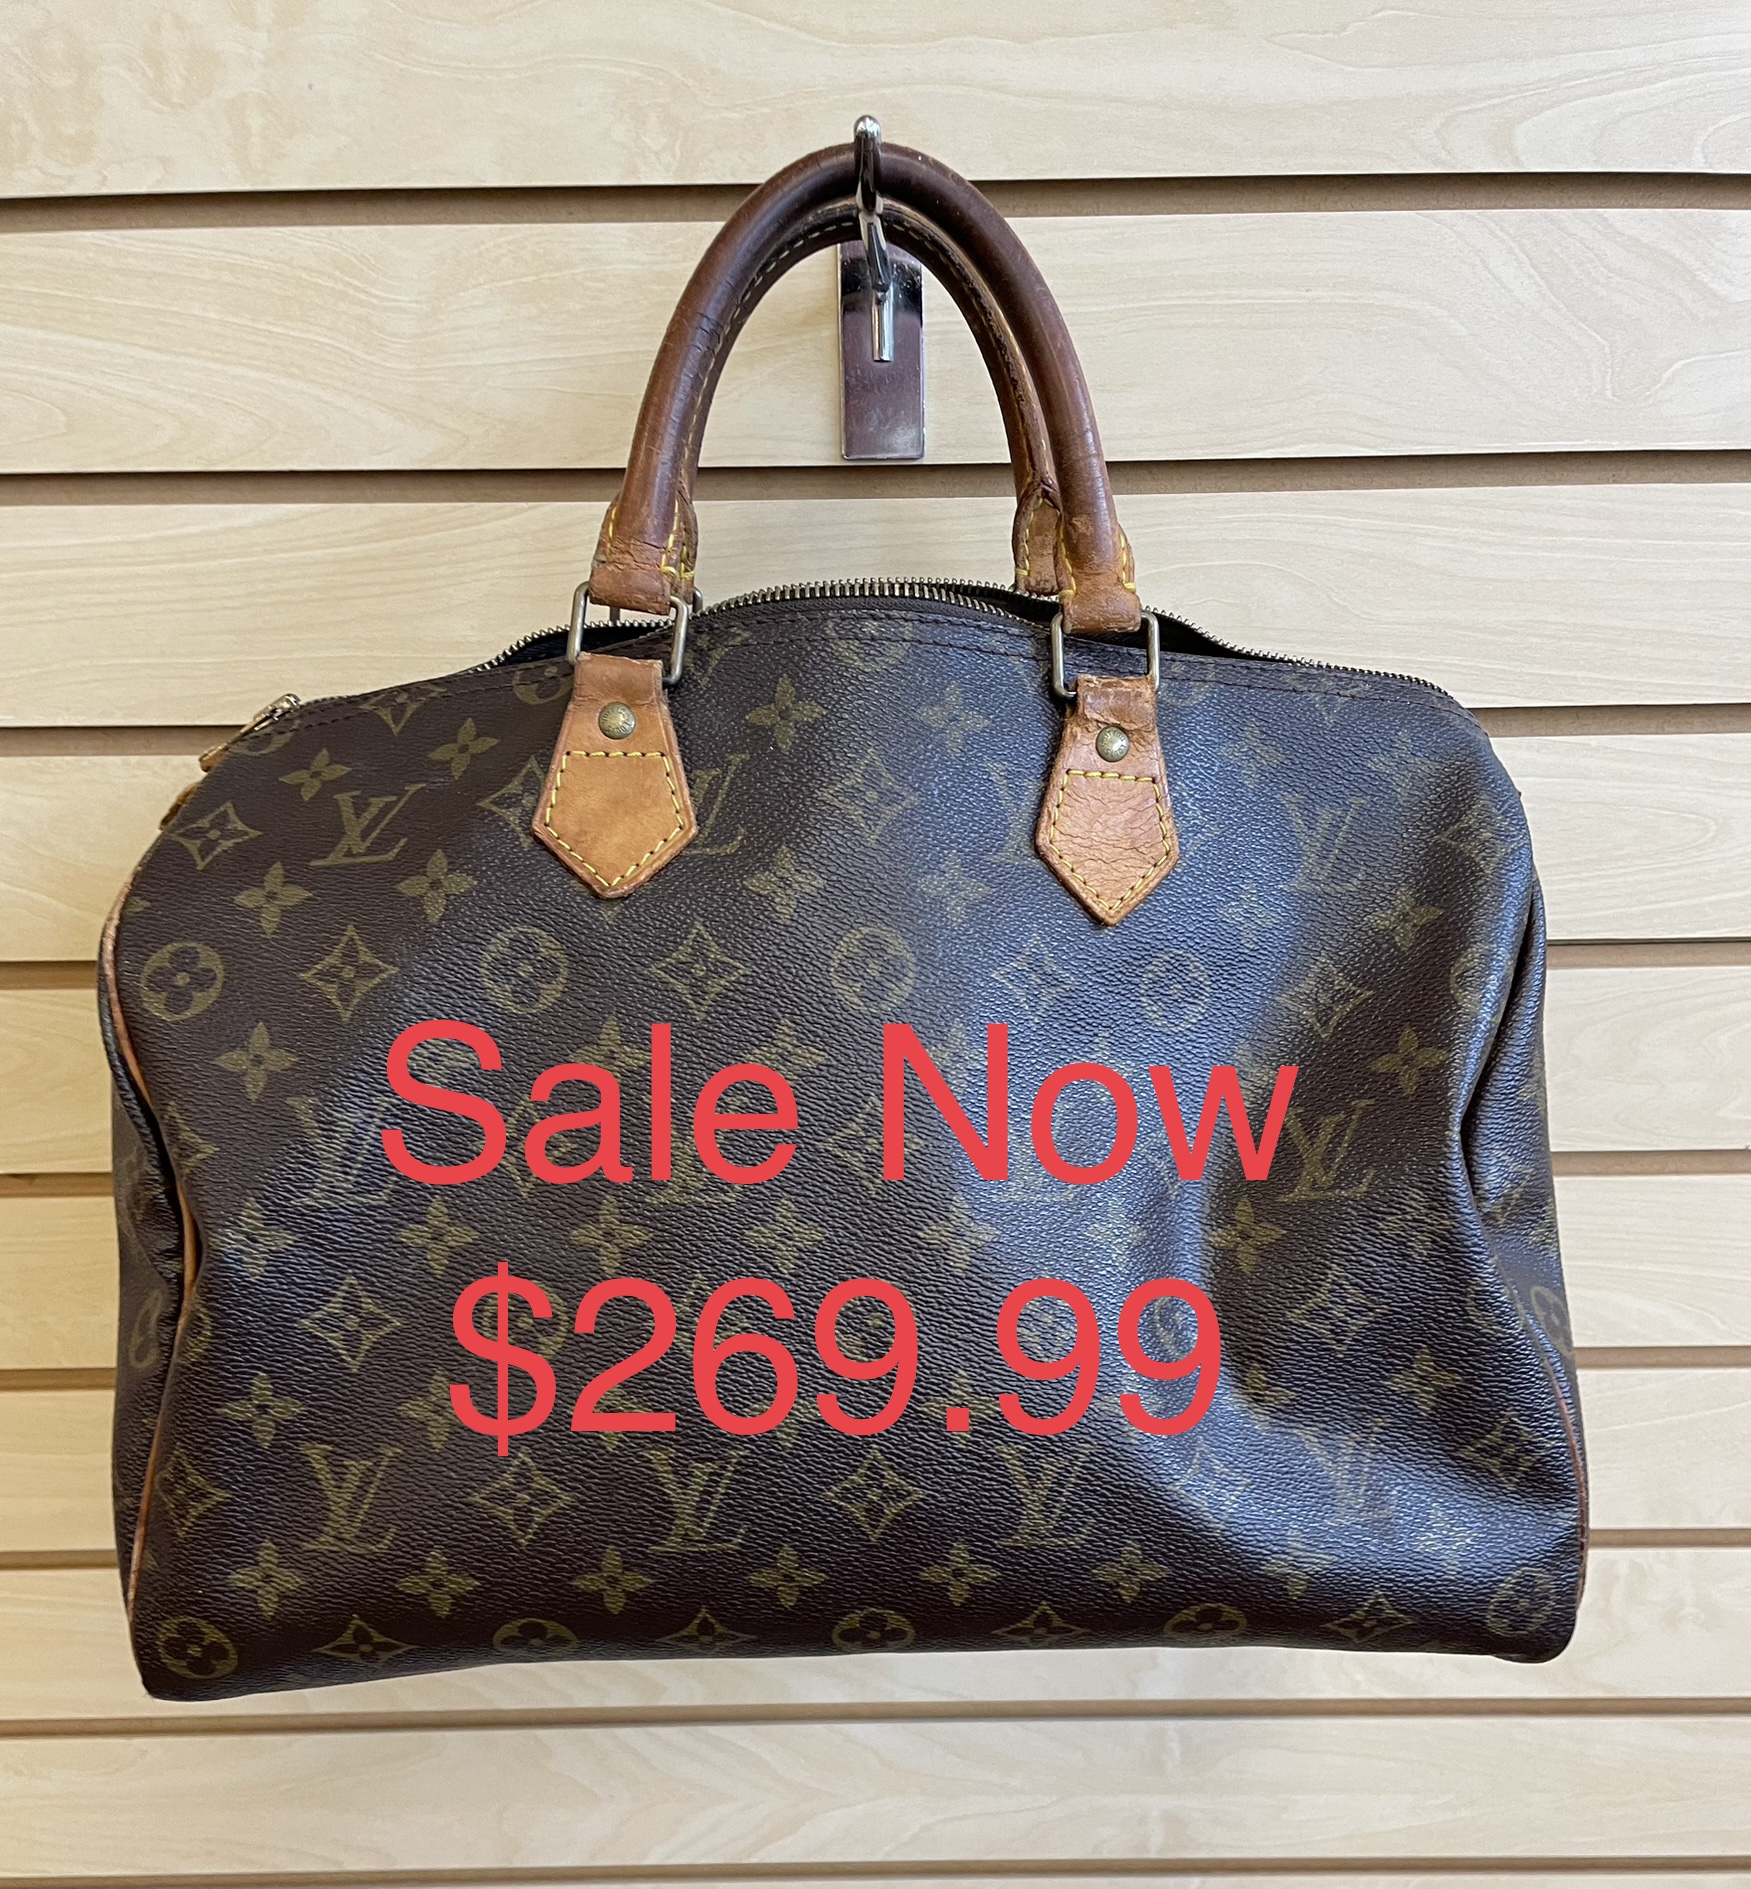 Reduced now to 269.99!!!! Was $449.99

L. V.  Speedy 35 Purse with Lock and Key As Is, Brown Logo Monogram Coated Canvas with Canvas Interior, Several Stains Throughout the Interior Lining, One Small Interior Pocket - Has Staining and Leather Opening is Cracked, Water Marks and Cracking on the Leather Exterior Handles and Piping, Torn and Cracked Leather on the Zipper Pull Tabs and the Zipper

Size: 13.75x7x8.5 inches

Reduced now to 269.99!!!!

*Additional shipping and insurance rates will apply. A separate invoice will be sent due to the value of this item.